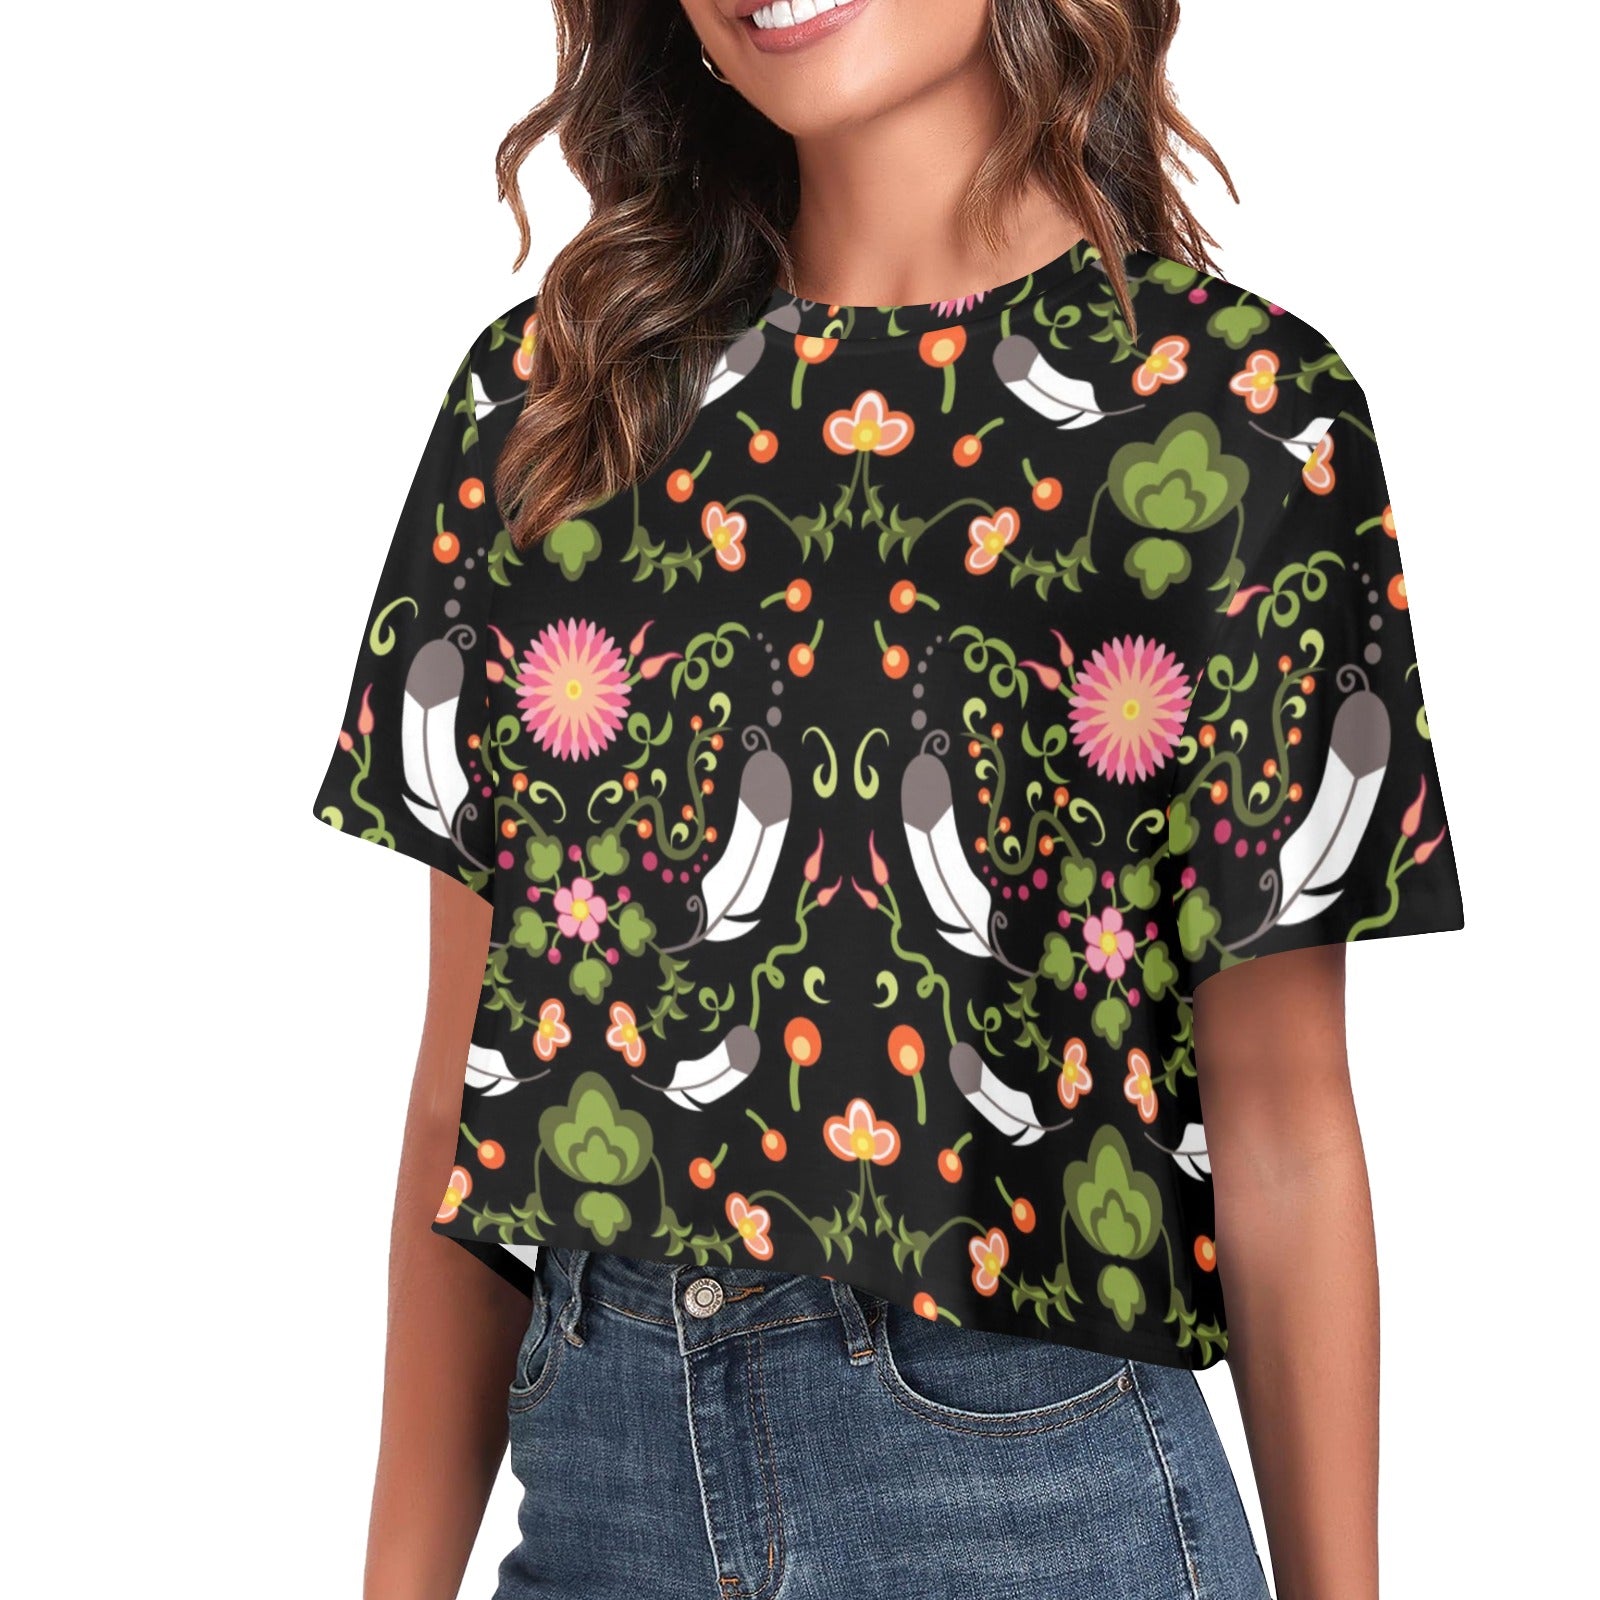 New Growth Women's Cropped T-shirt